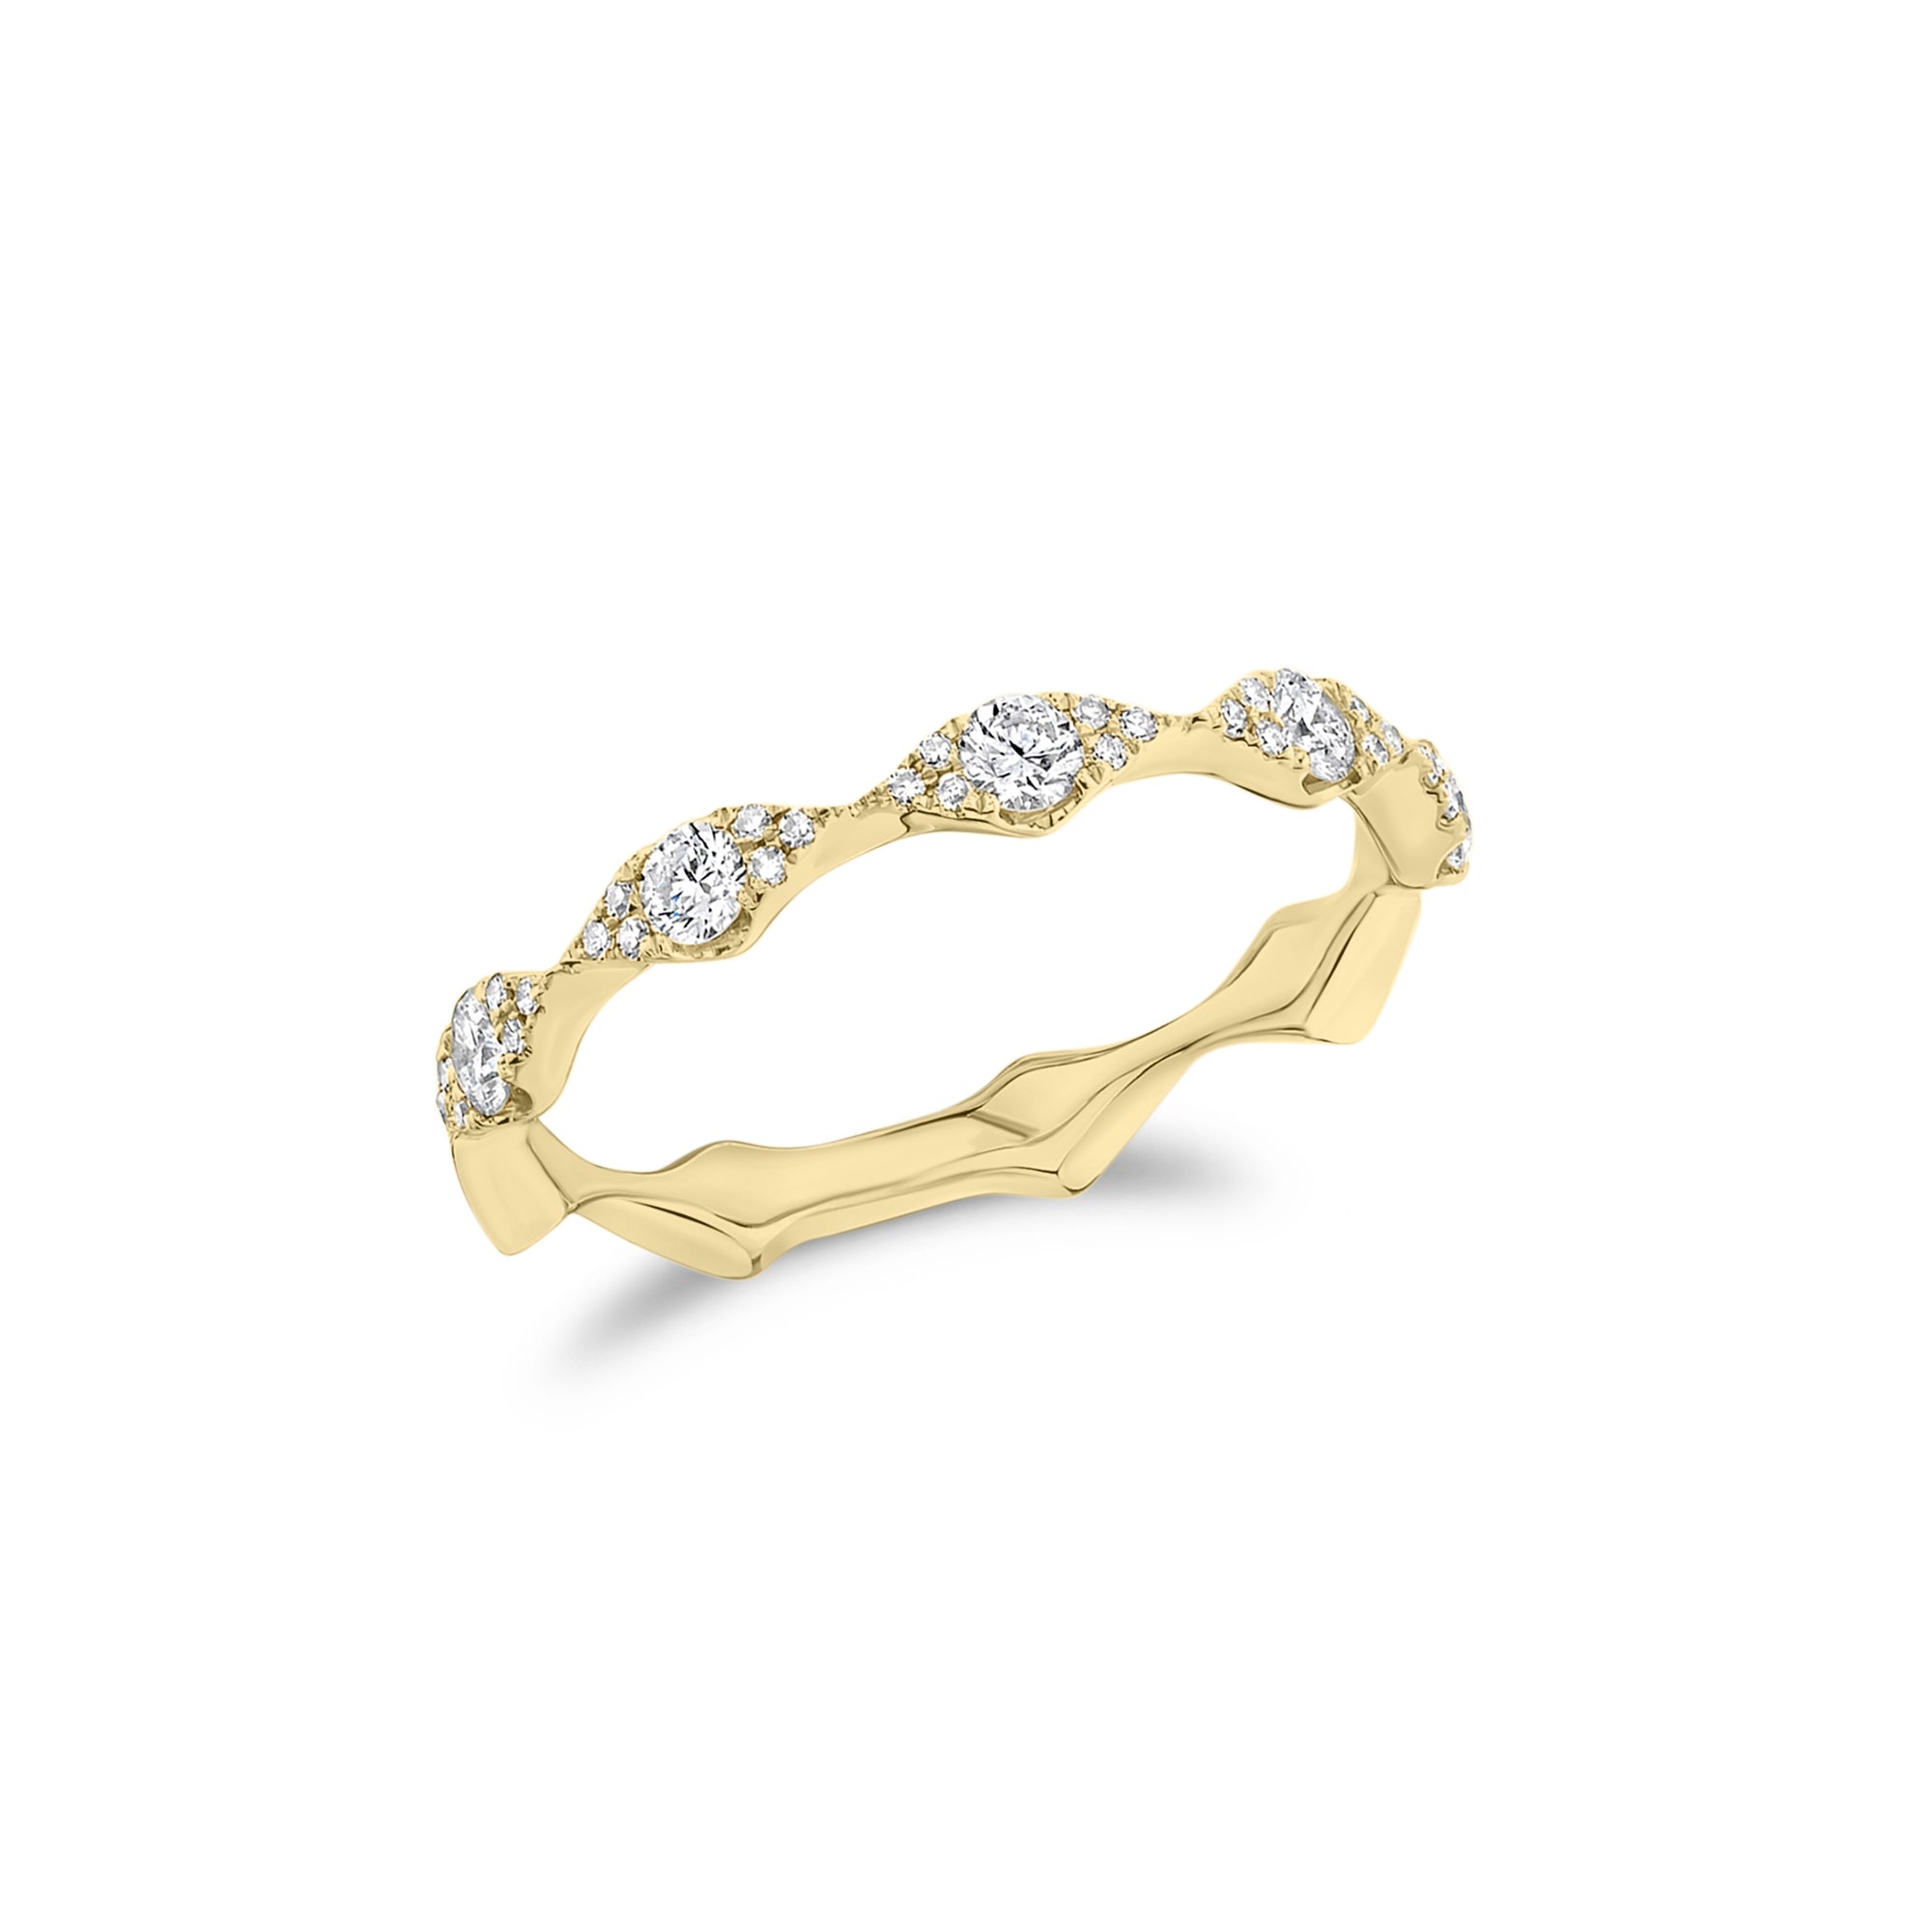 Diamond Marquis Clusters Stackable Ring  - 14K gold  - 0.38 cts round diamonds